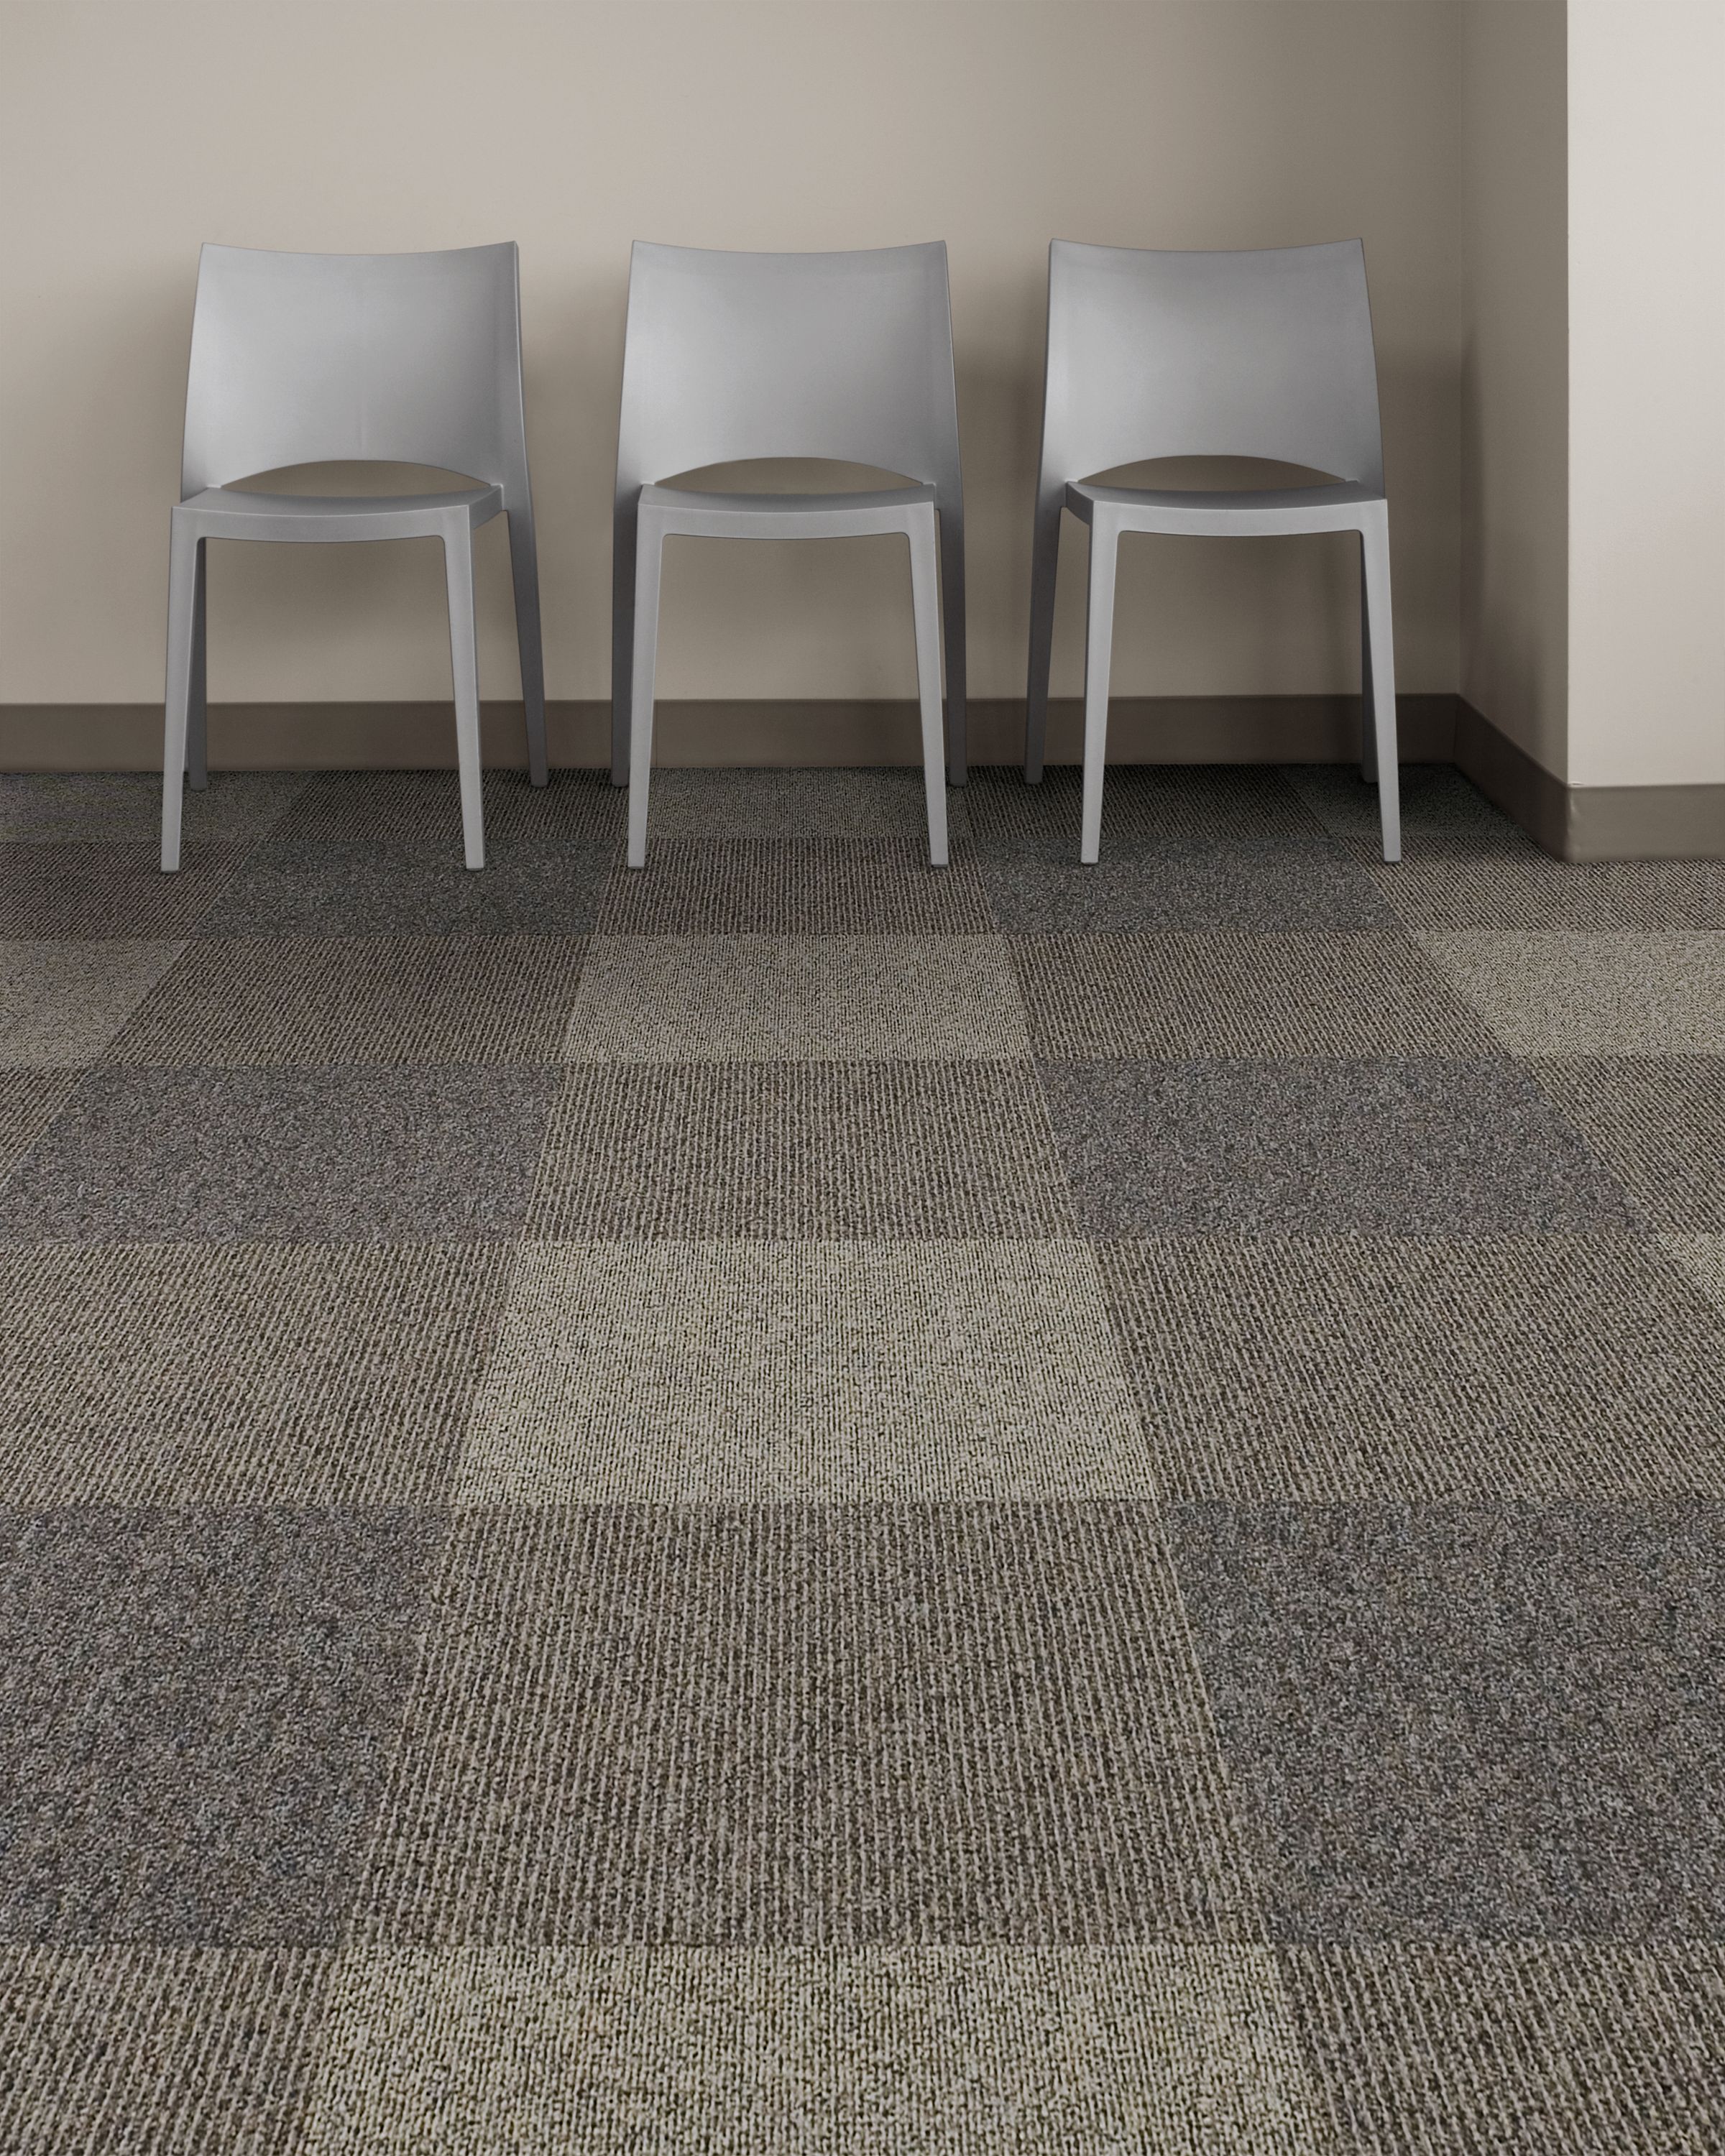 Interface Broomed, Grooved and Brushed carpet tile in room with three chairs image number 6